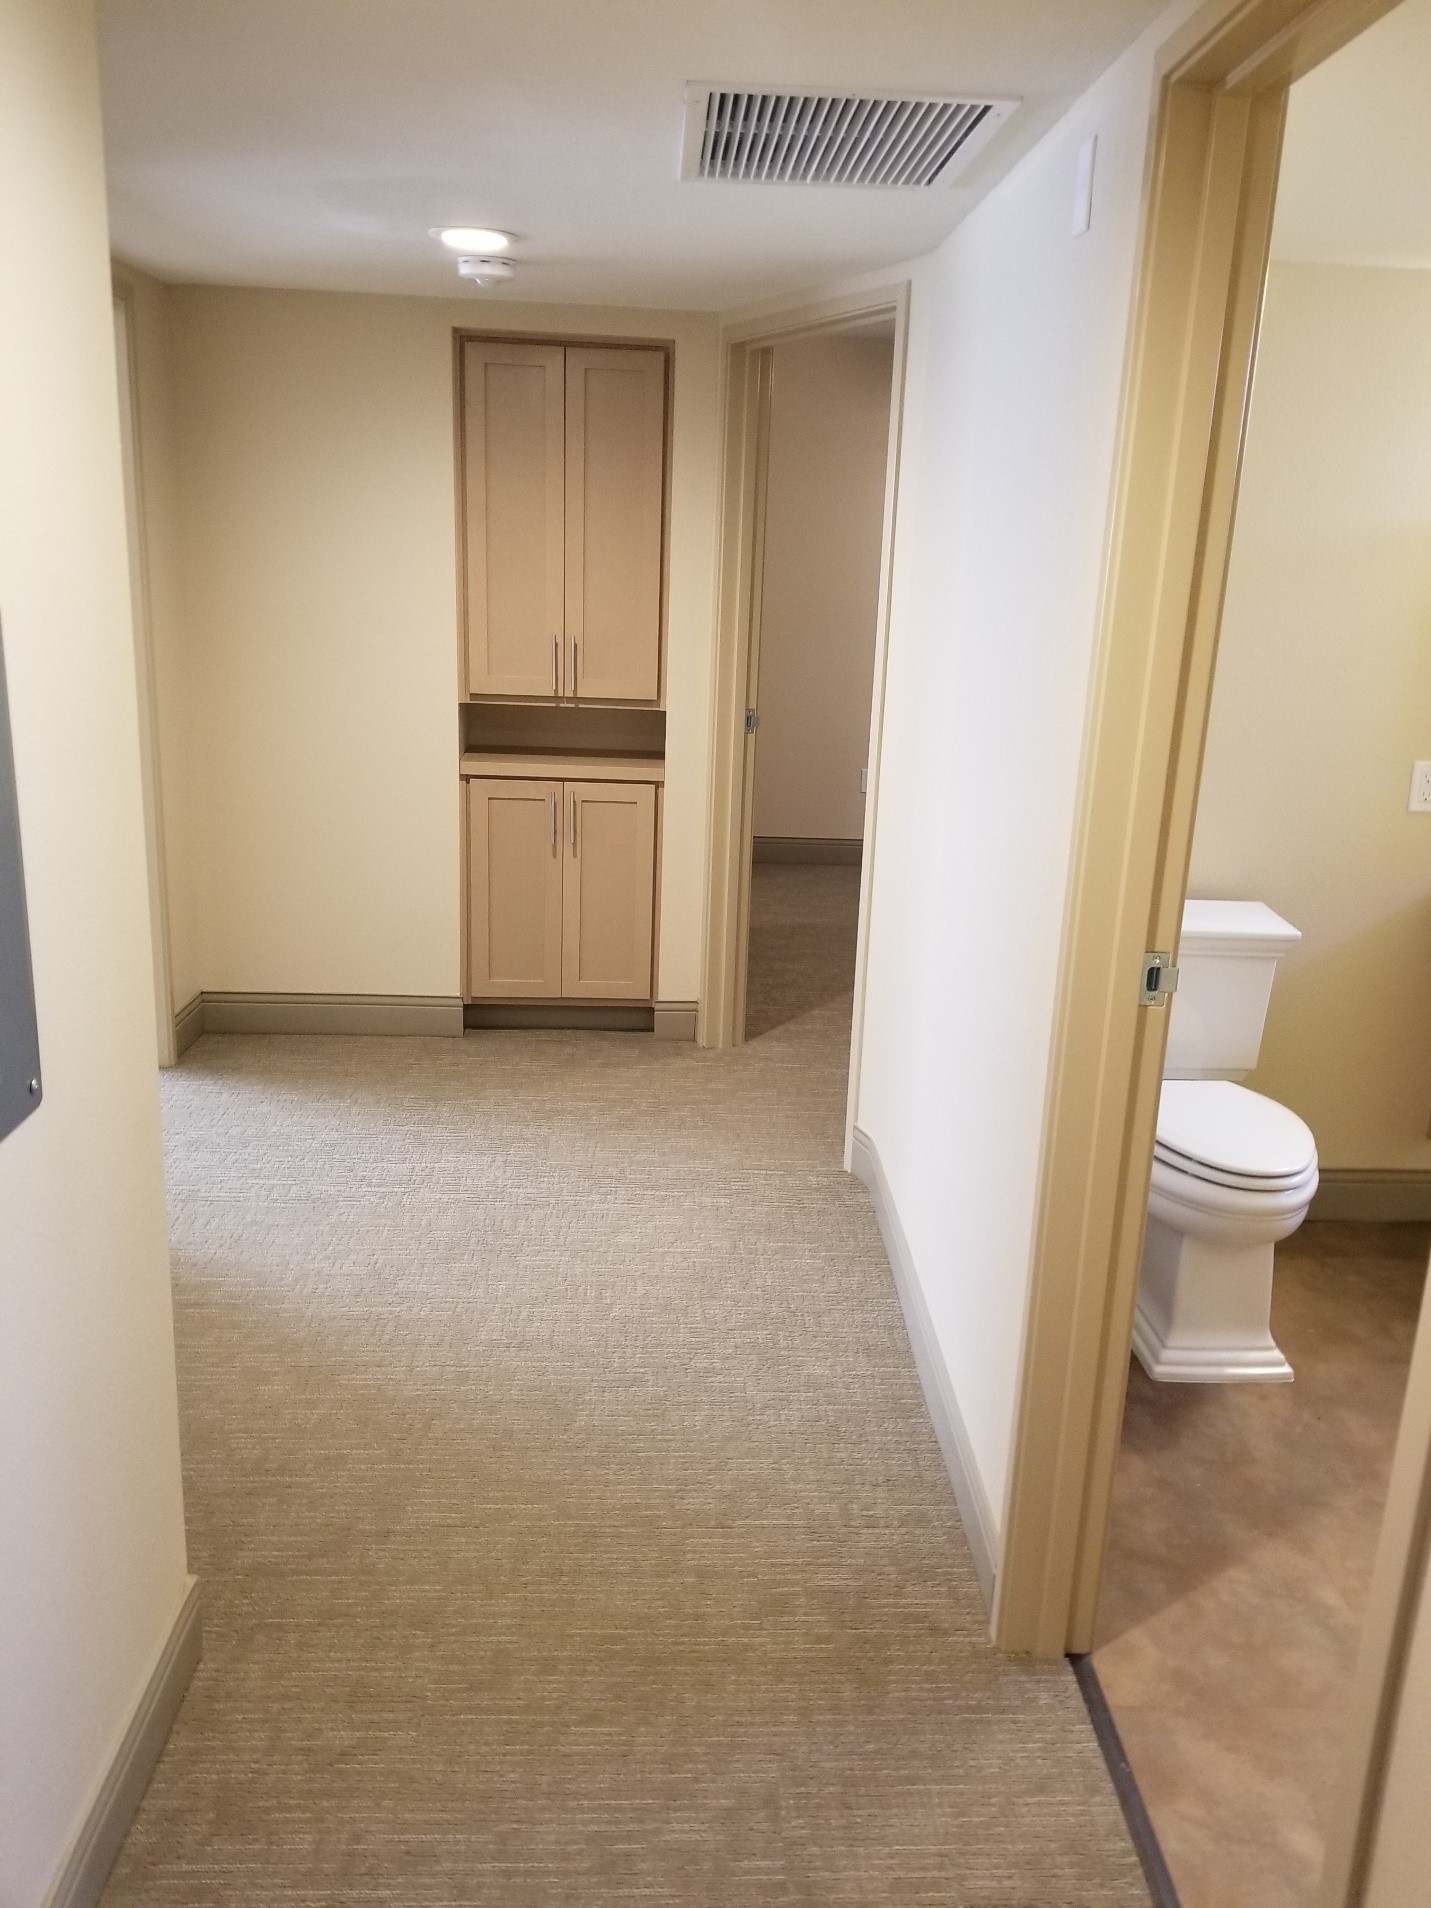 Hallway with accessible cabinets - handles can all be reaching from a wheelchair